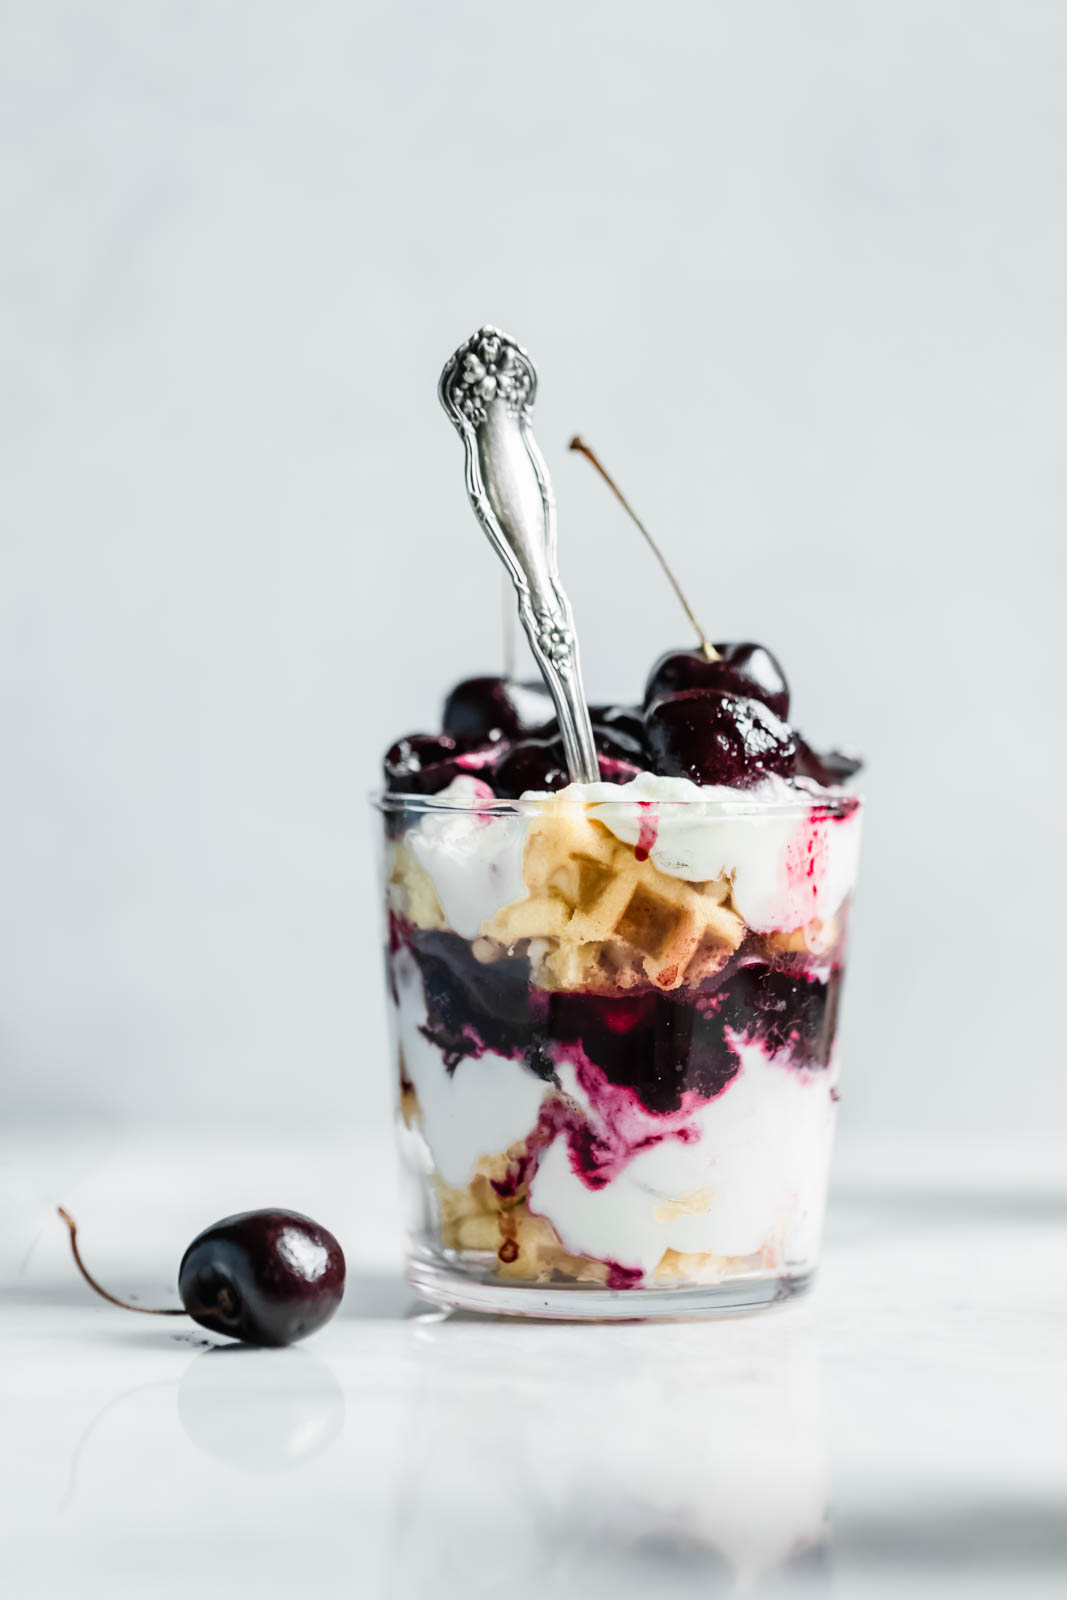 Layers of quick sautéed black cherries, fresh whipped cream, and Belgian waffles make this no-bake waffle parfait a total no-brainer summer dessert.